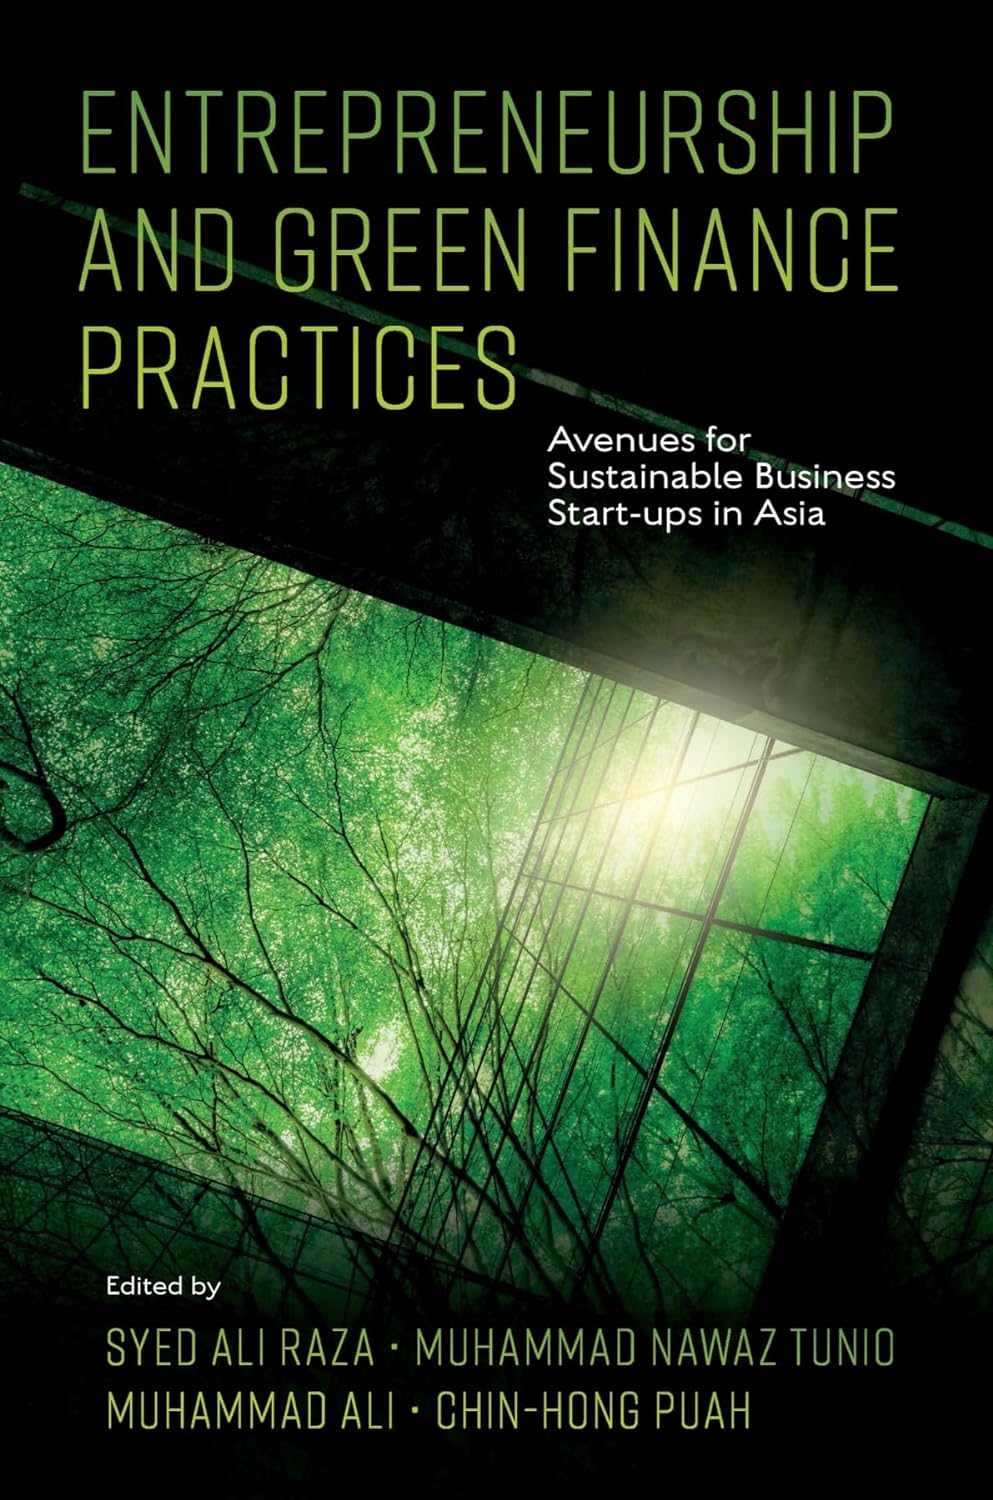 Green Entrepreneurship and Green Finance Practices: Avenue for Sustainable Business Startups in Asia